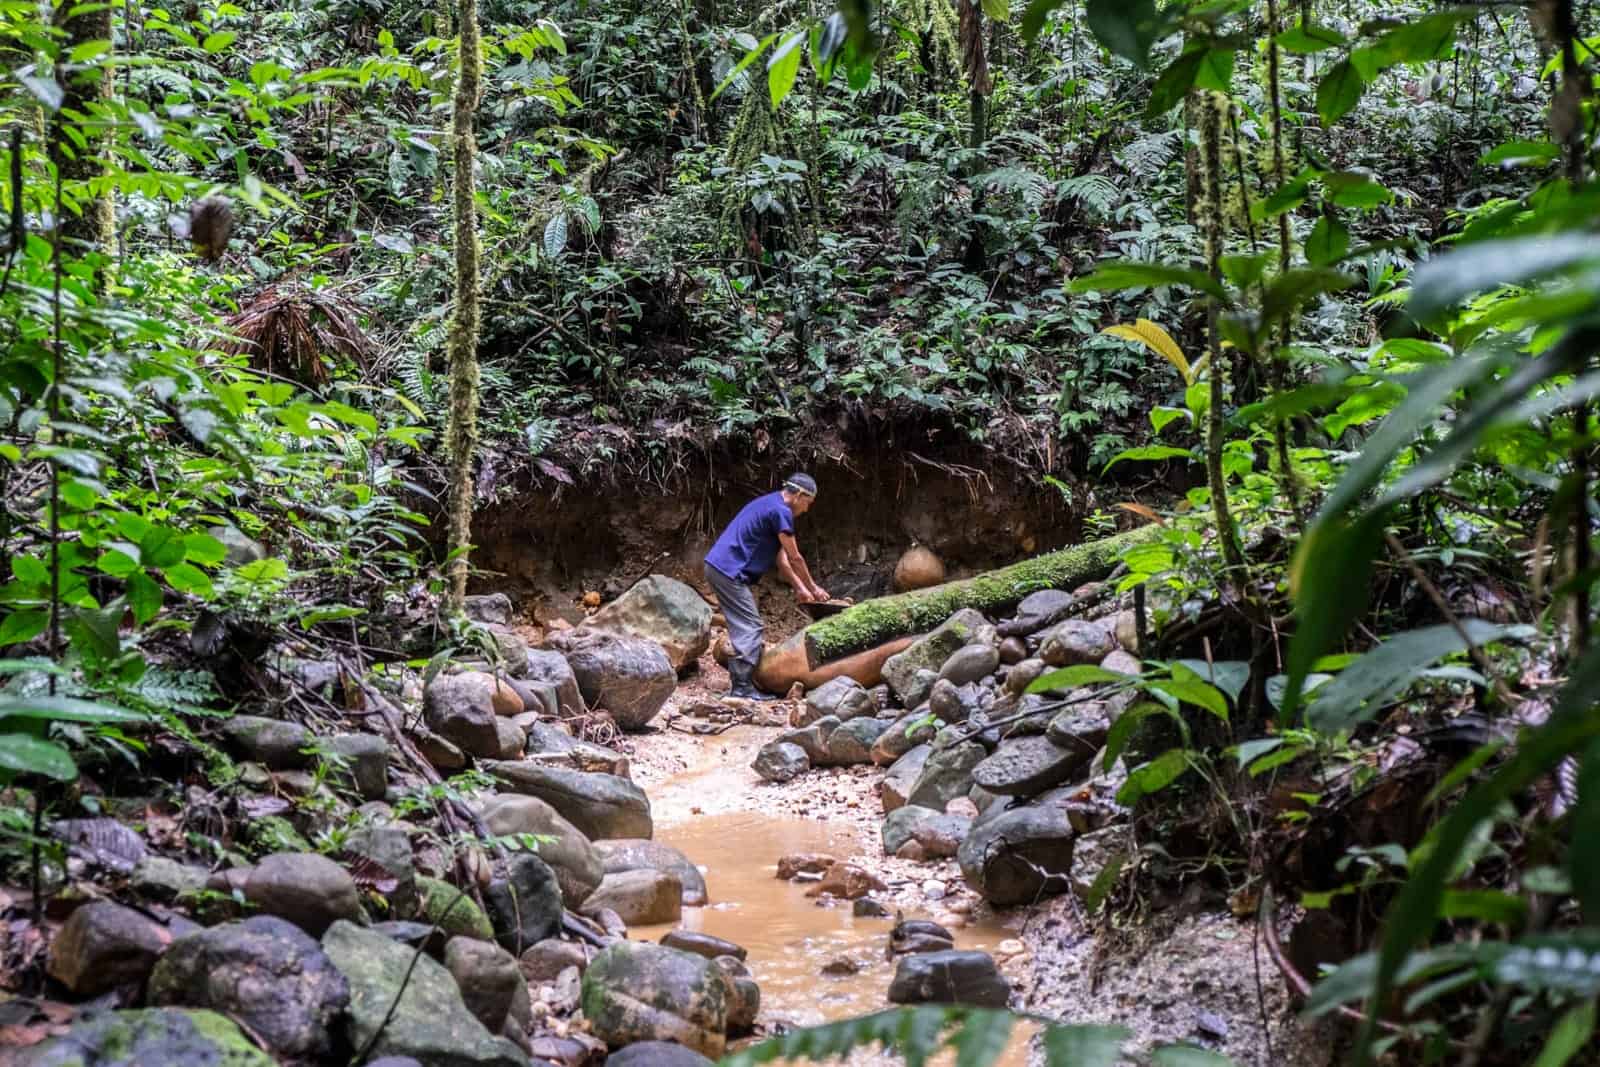 A man in a blue shirt at the end of a rocky mud clay river in the Ecuador Amazon jungle.